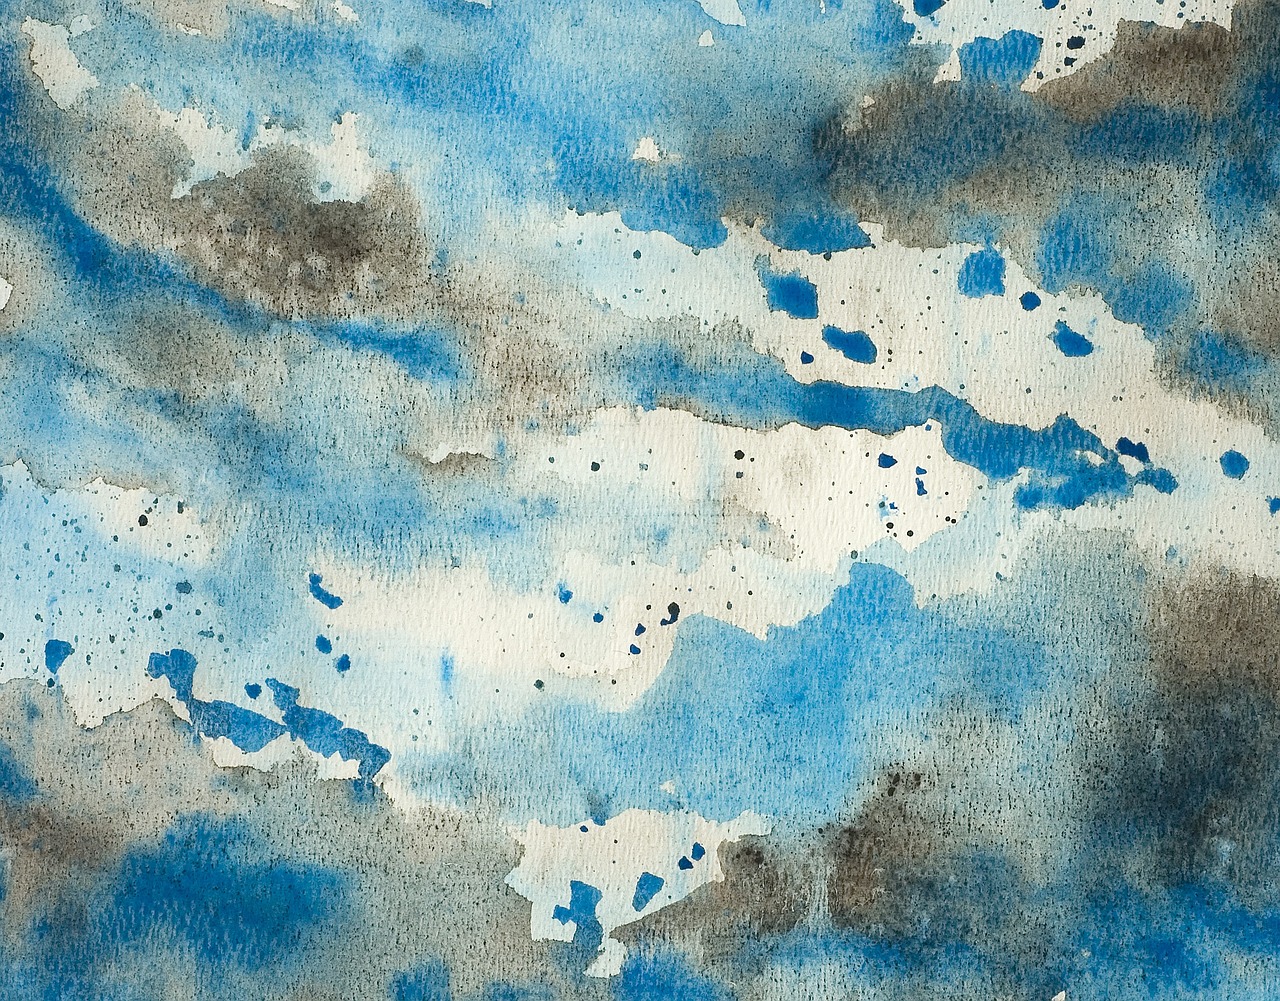 watercolor background design free photo